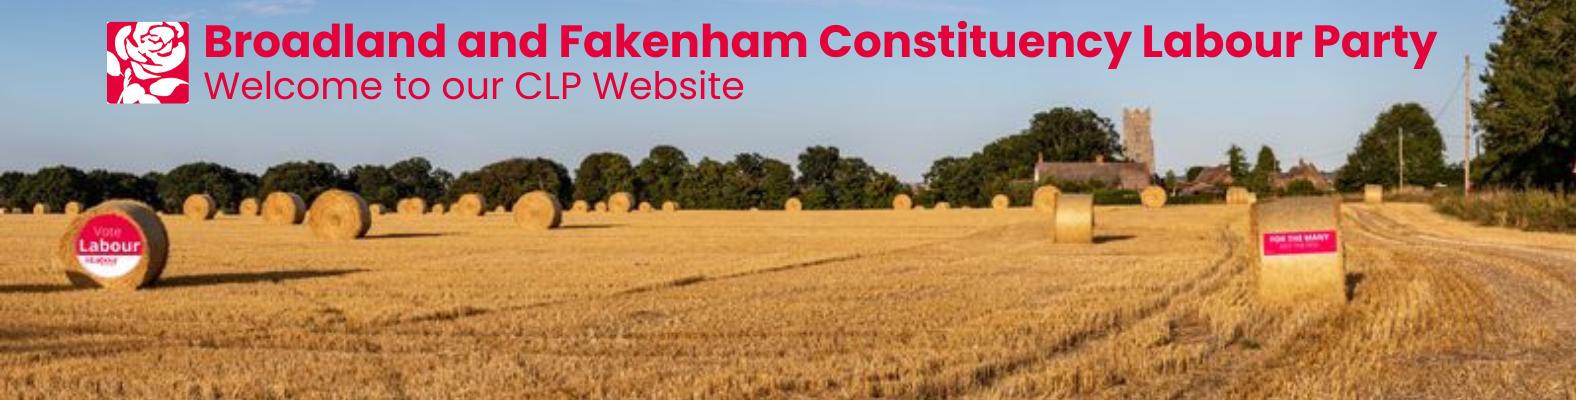 Broadland and Fakenham Constituency Labour Party - Welcome to our CLP Website